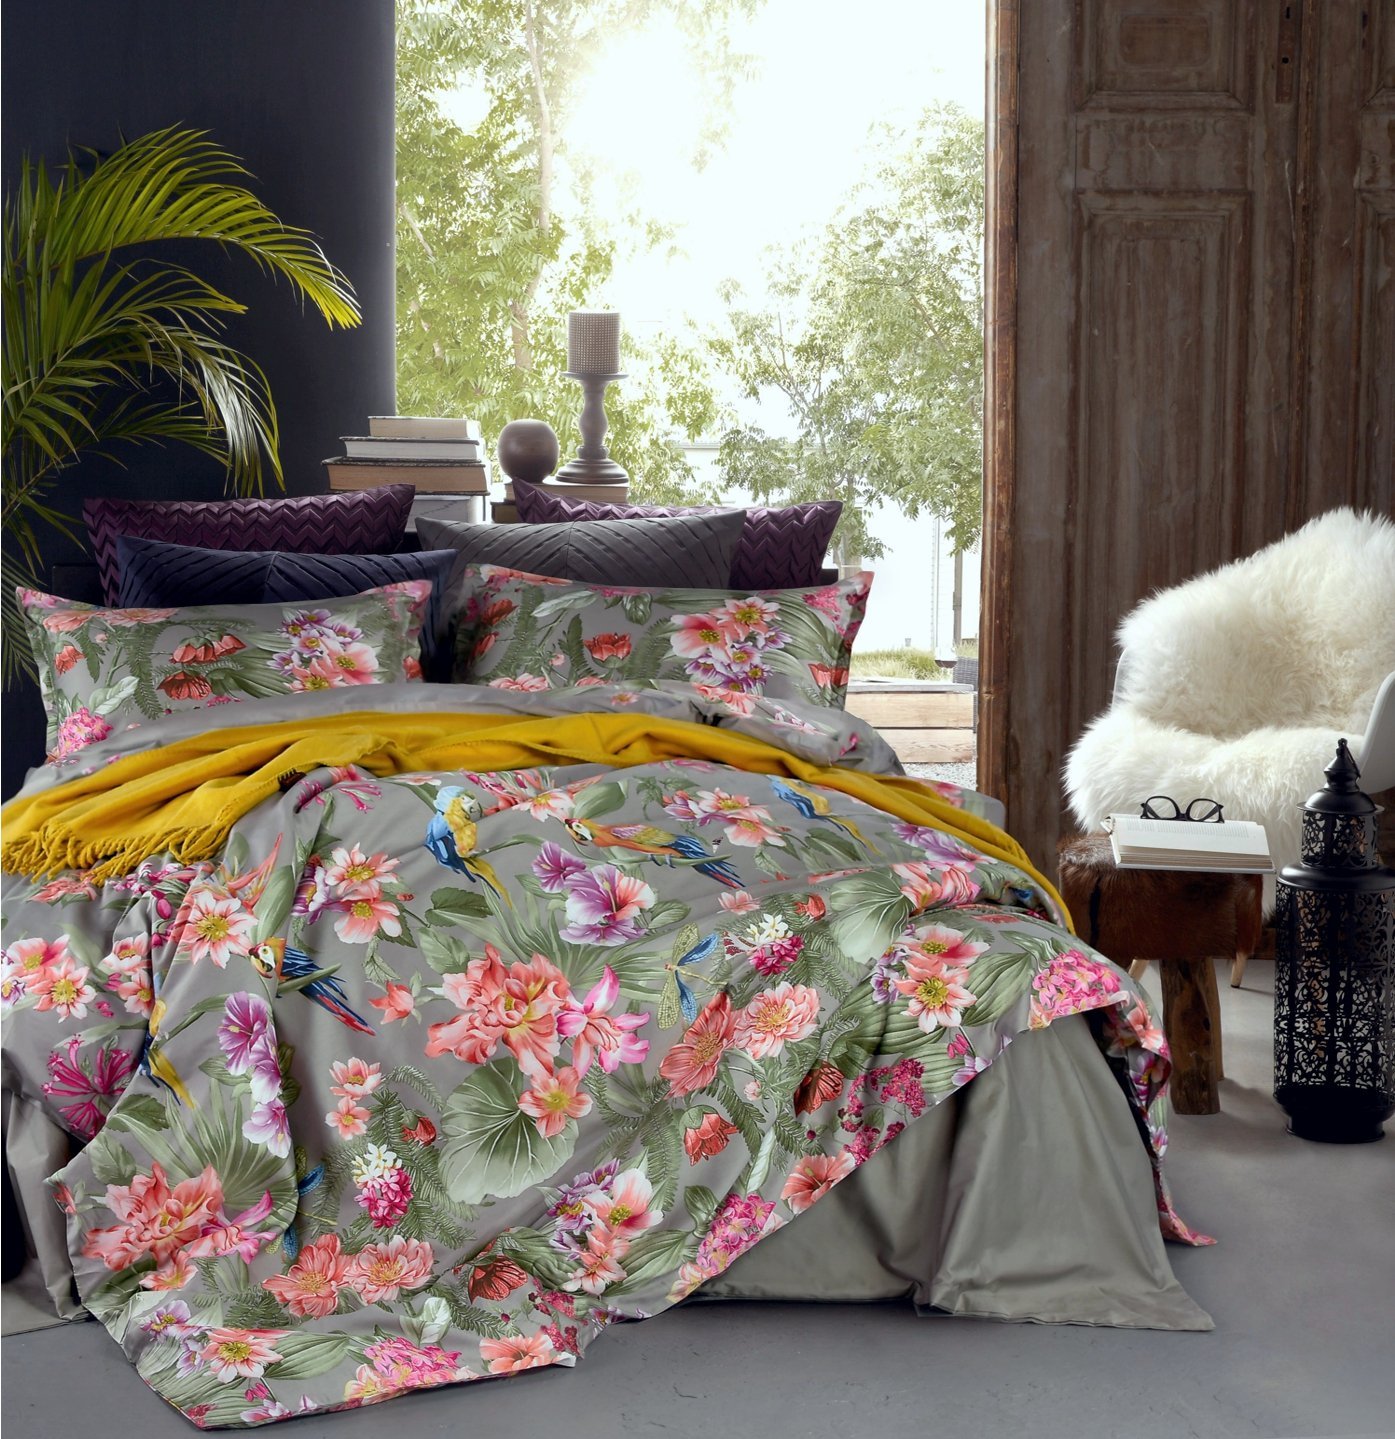 Tropical Vintage Botanical Flower and Bird Print Bedding 400tc Cotton  Sateen Romantic Floral Scarf Duvet Cover Set Colorful Antique Drawing of  Exotic 